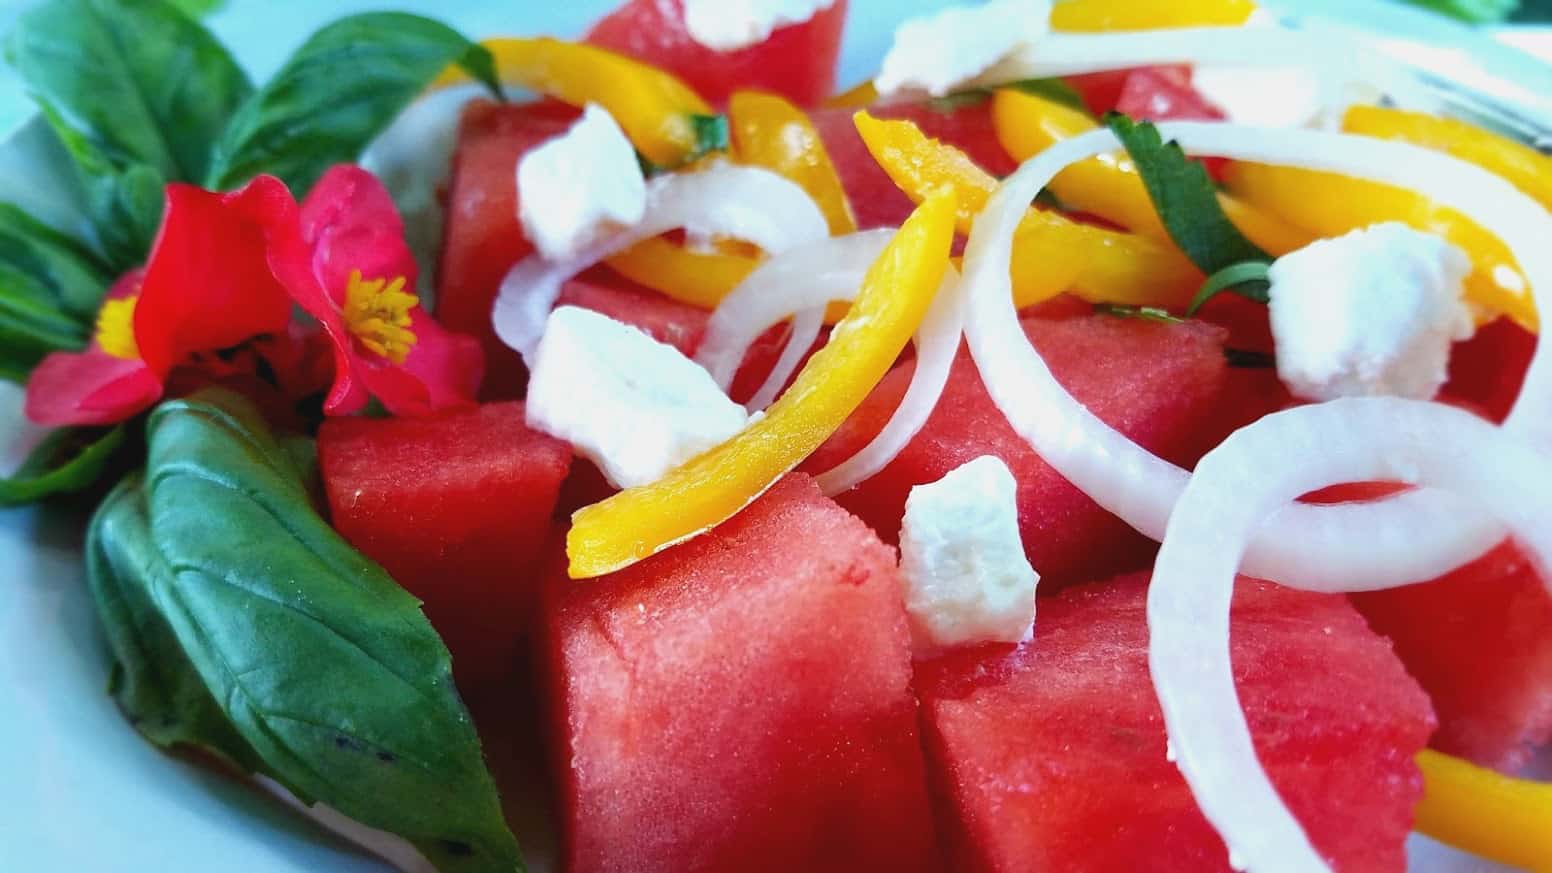 Watermelon Salad is the perfect summer treat